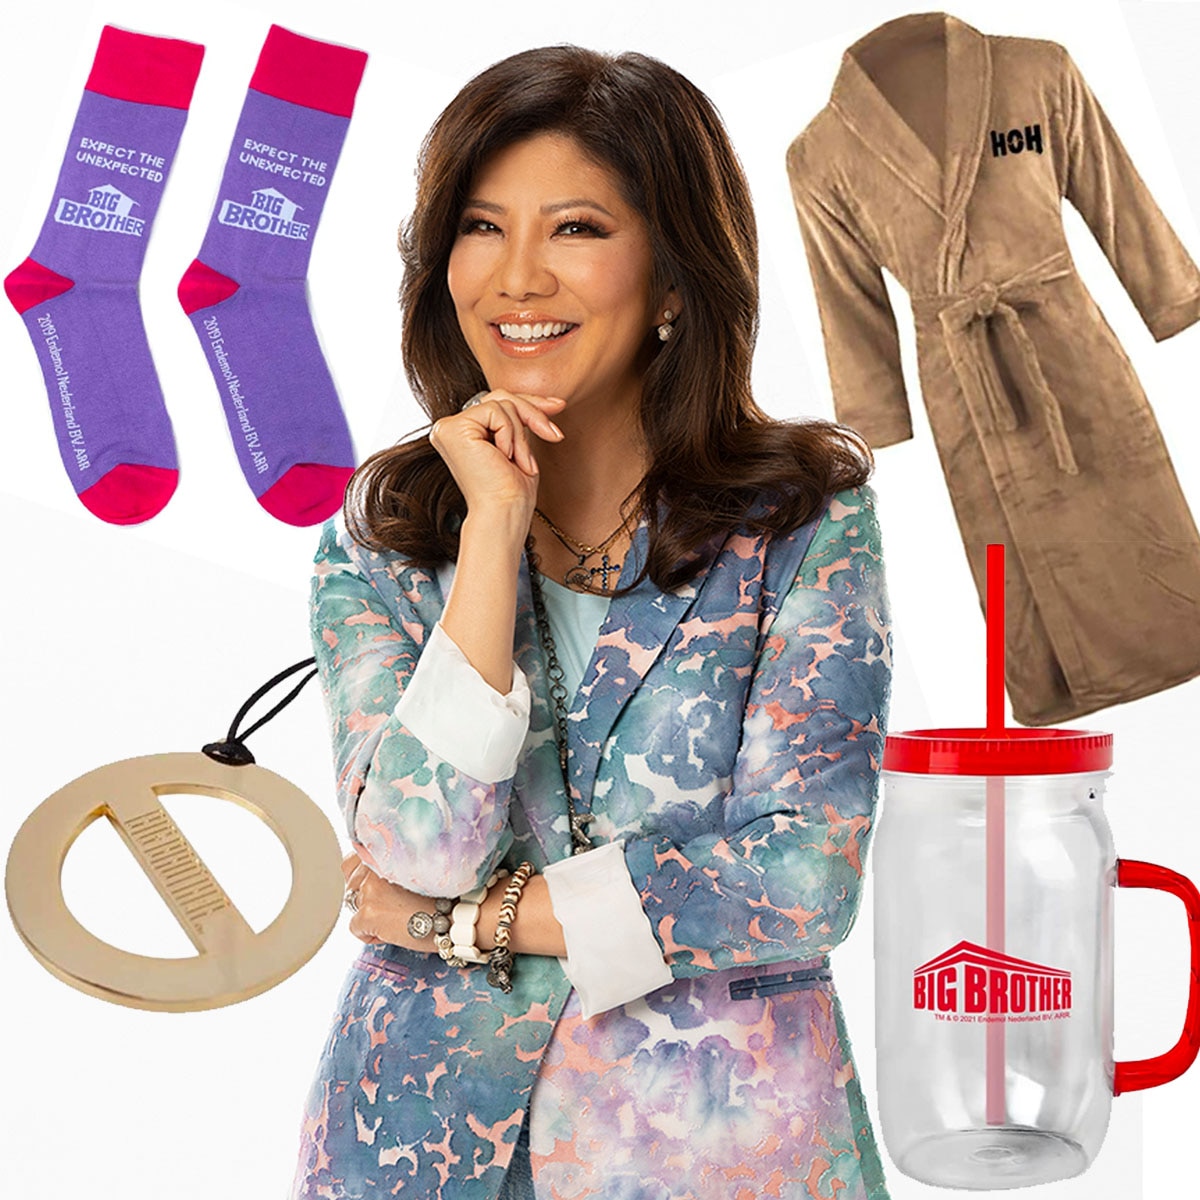 Big Brother Gift Guide